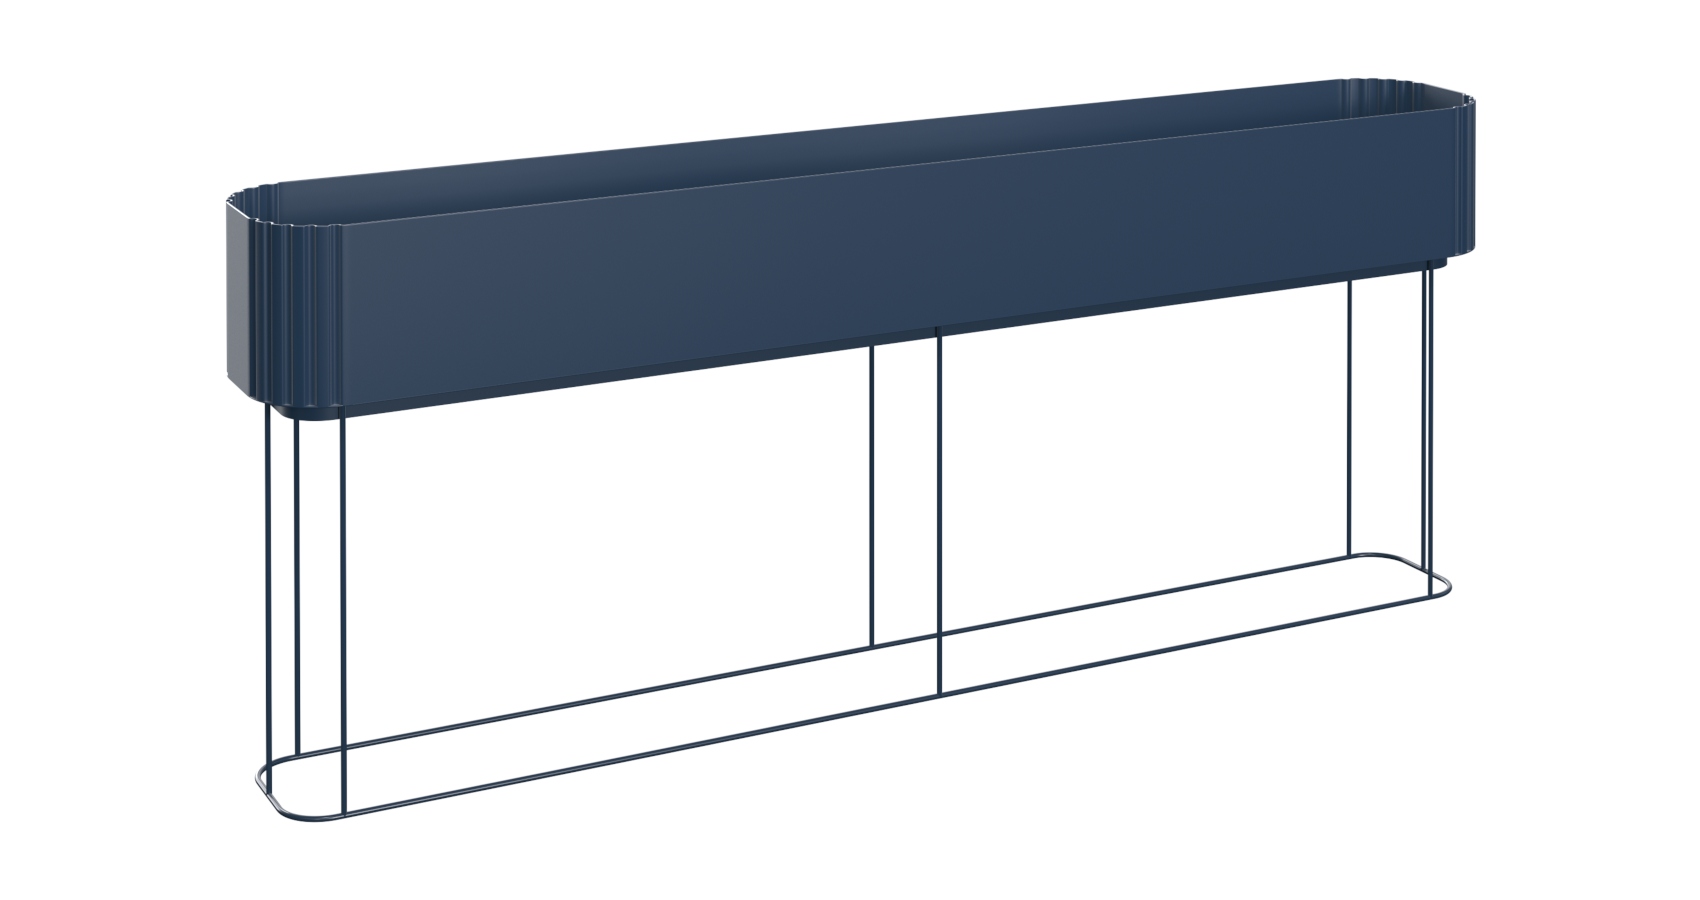 Cubby Planter in navy 1500mm wide in front view